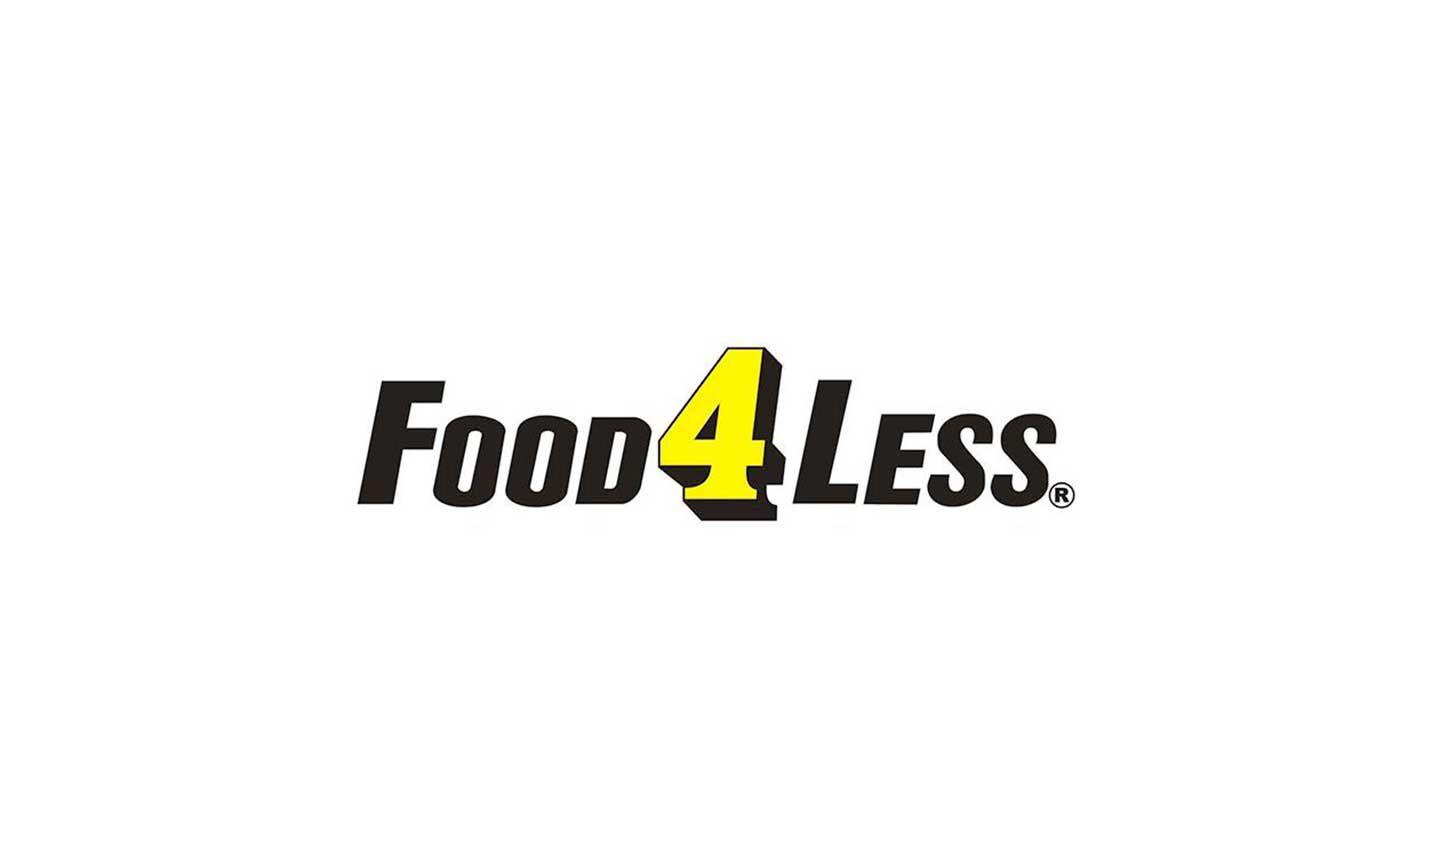 Food 4 Less Logo - Food 4 Less Brings Blockchain To Shoppers With New Soccer Promo